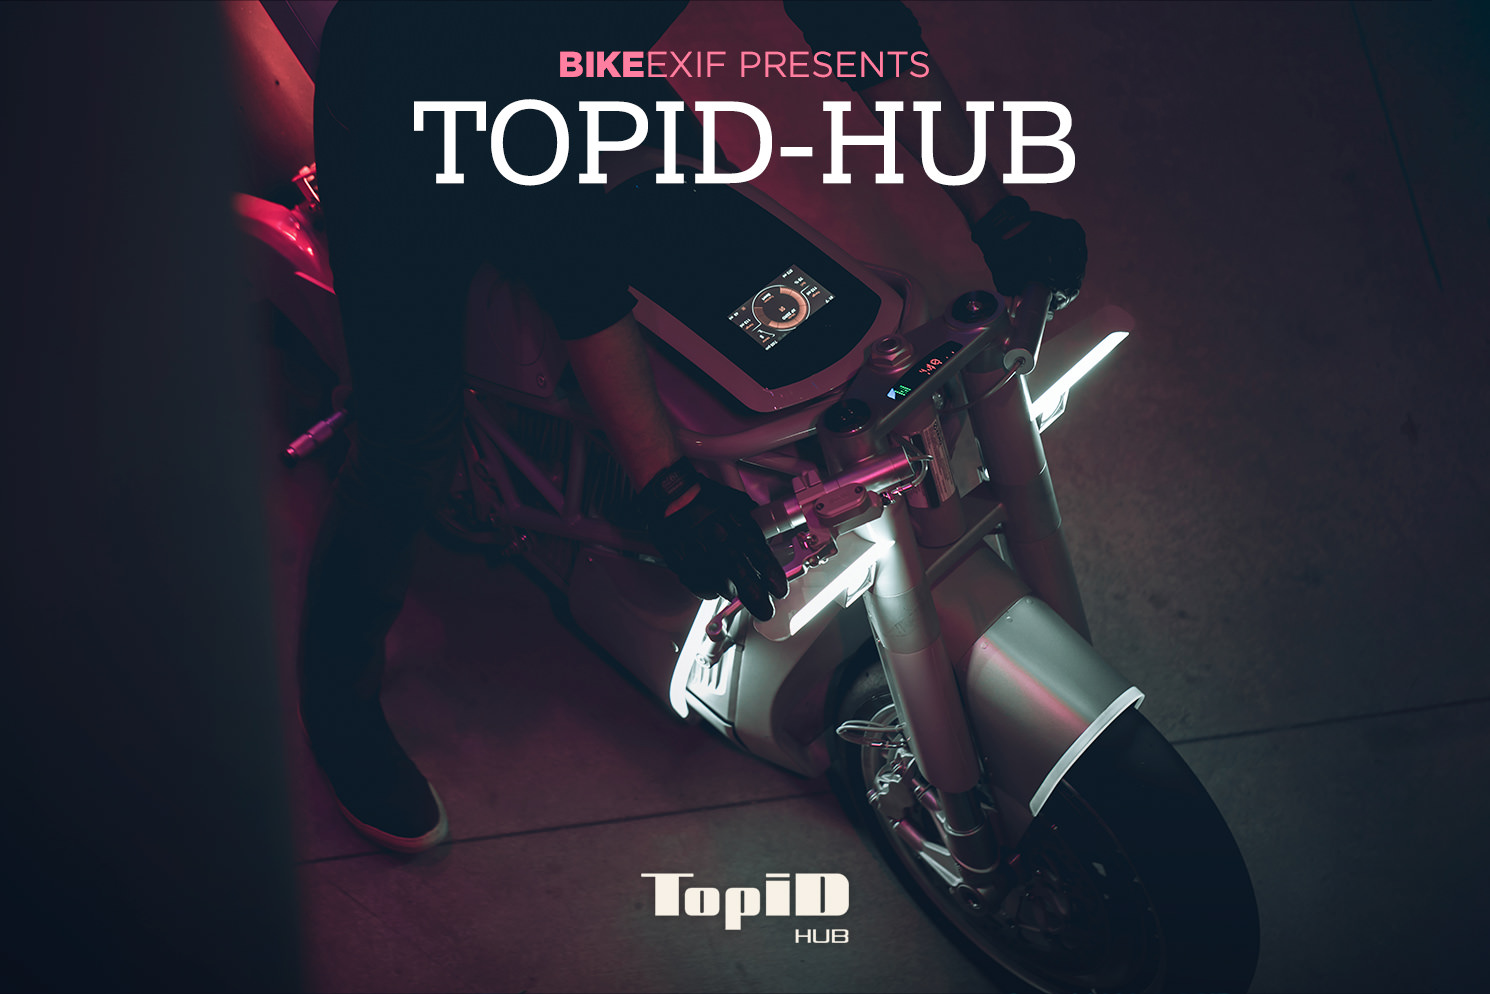 Introducing TopID-Hub—a new series from the mind behind Pagnol Motor